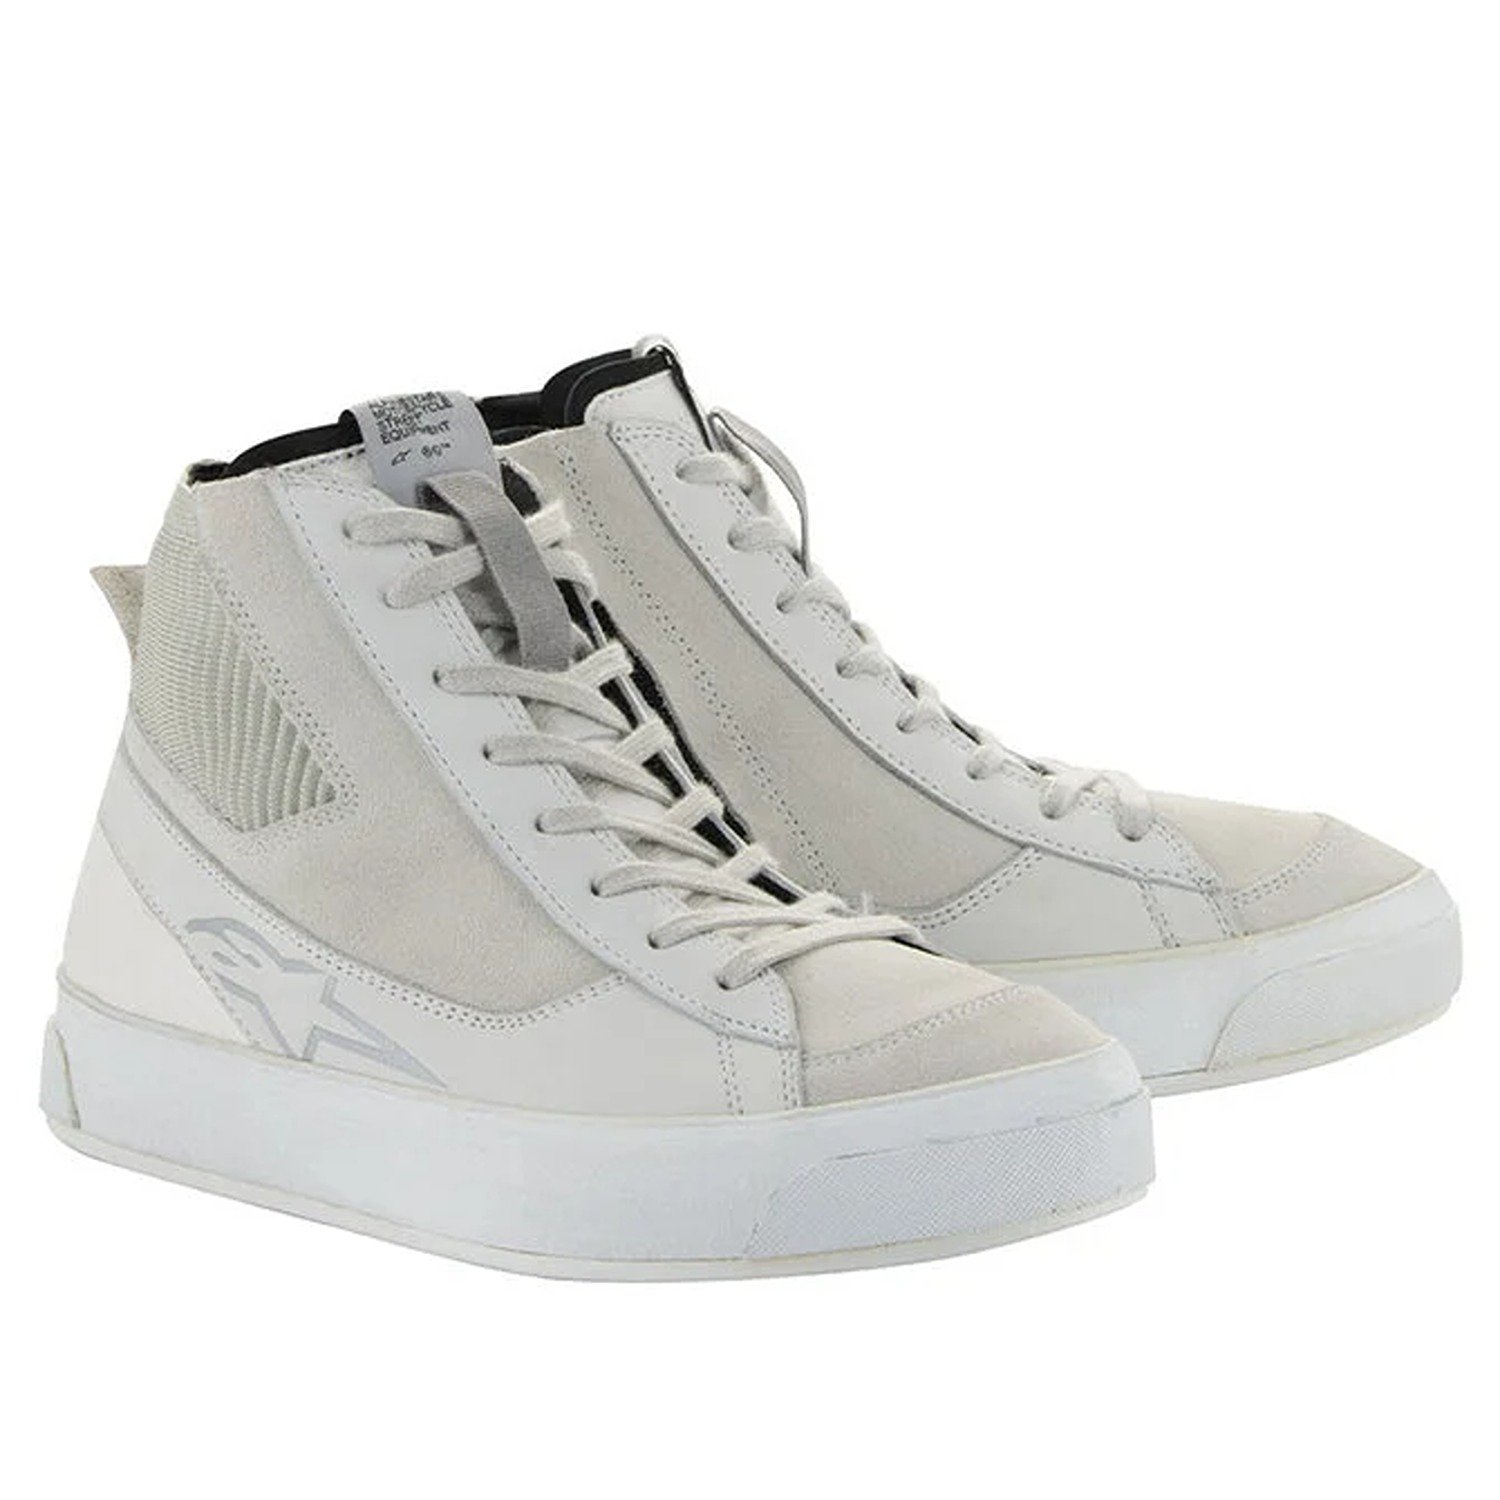 Image of Alpinestars Stella Stated Podium Shoes White Cool Gray Taille US 105